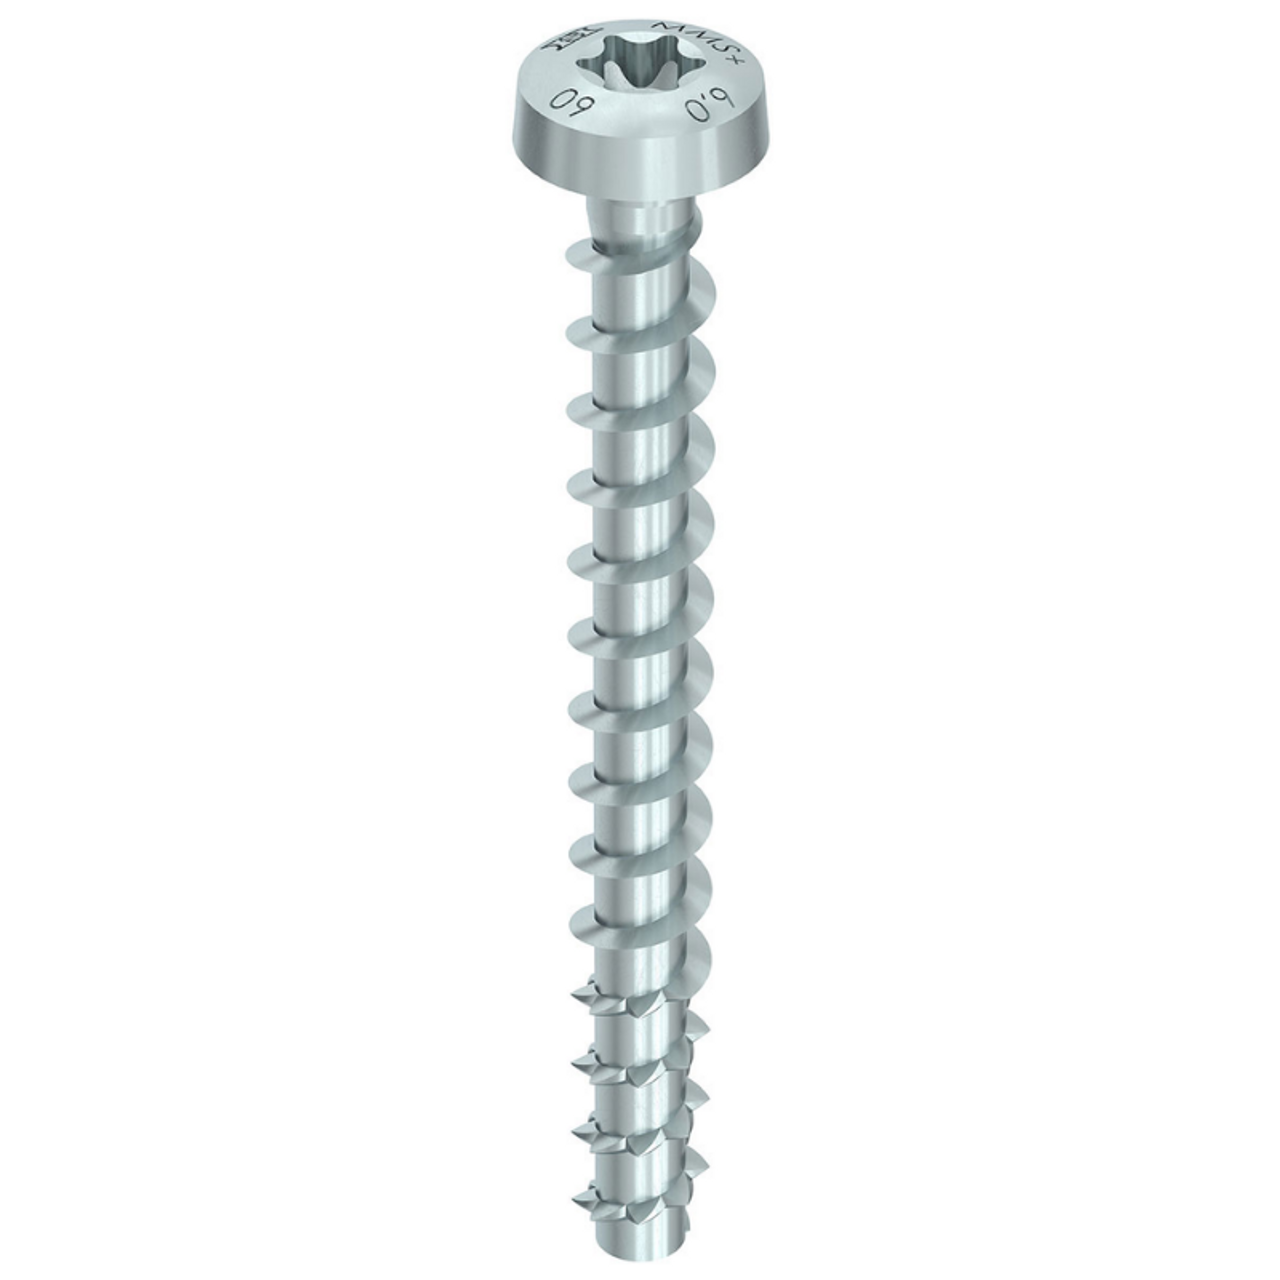 Buy Online HECO 5mm Silver Zinc Pan Head Screw Anchor with Silver Zinc for the Construction Industry and Installers in Victoria and New South Wales.